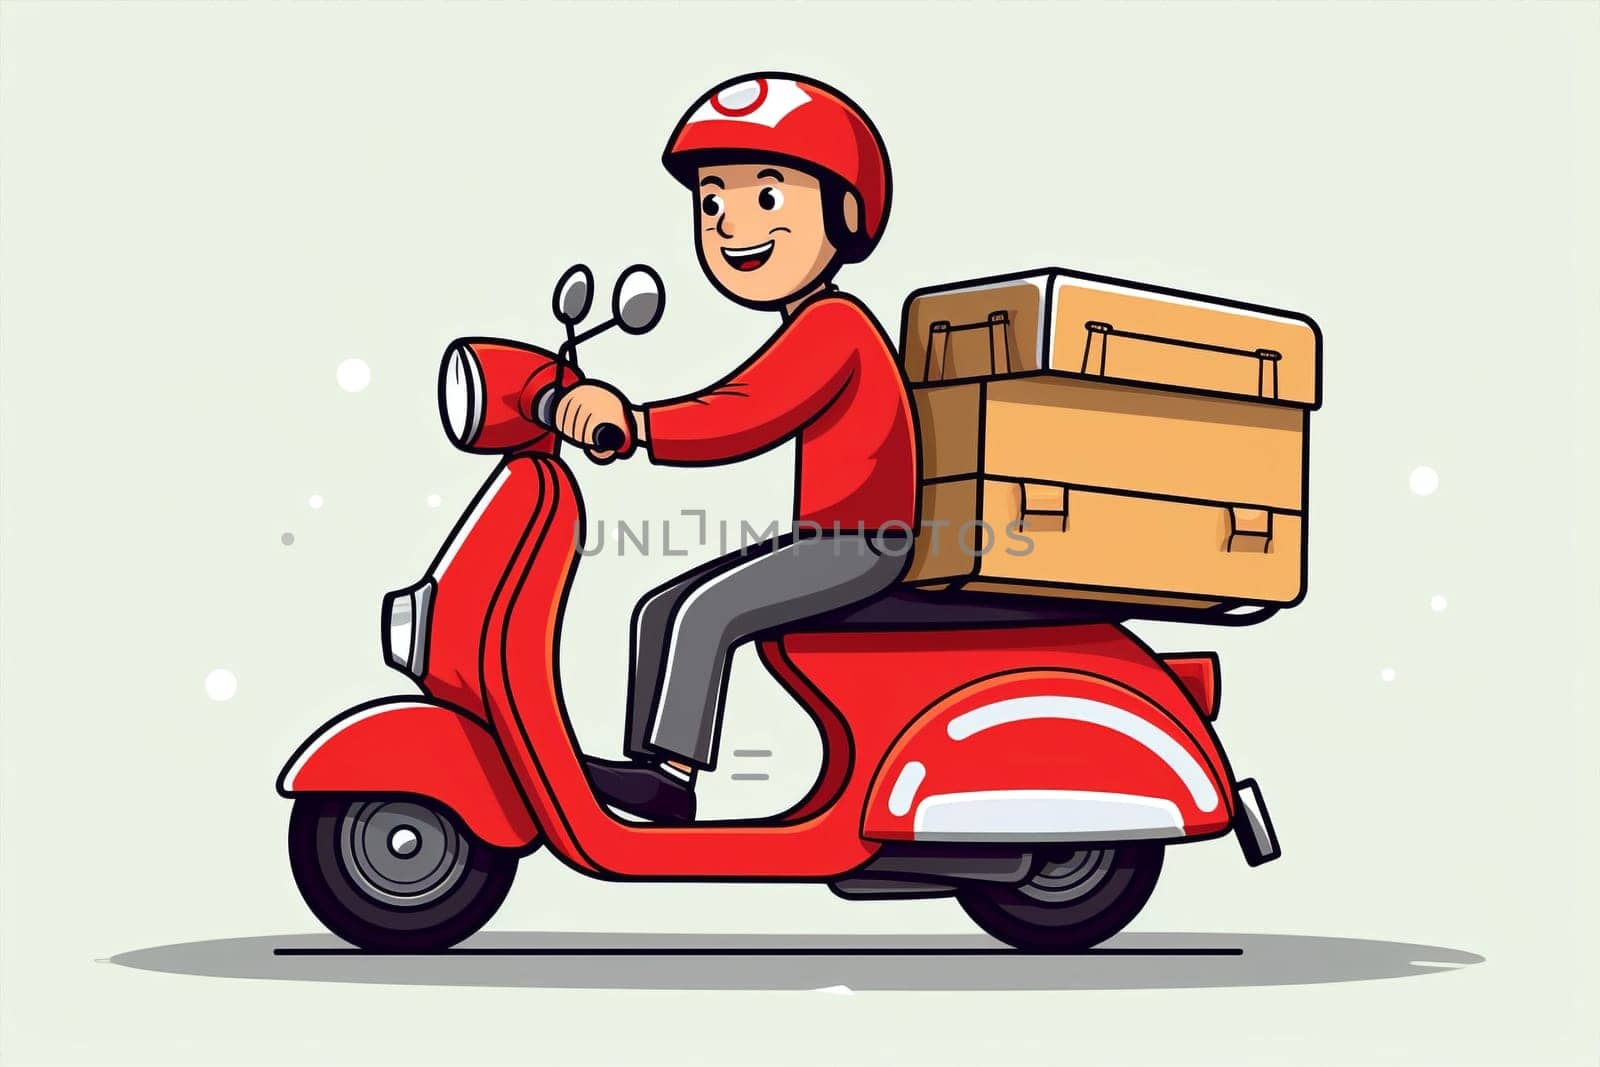 Man box car scooter courier transportation red motorcycle fast business package order online motorbike delivery city speed food deliver service bike